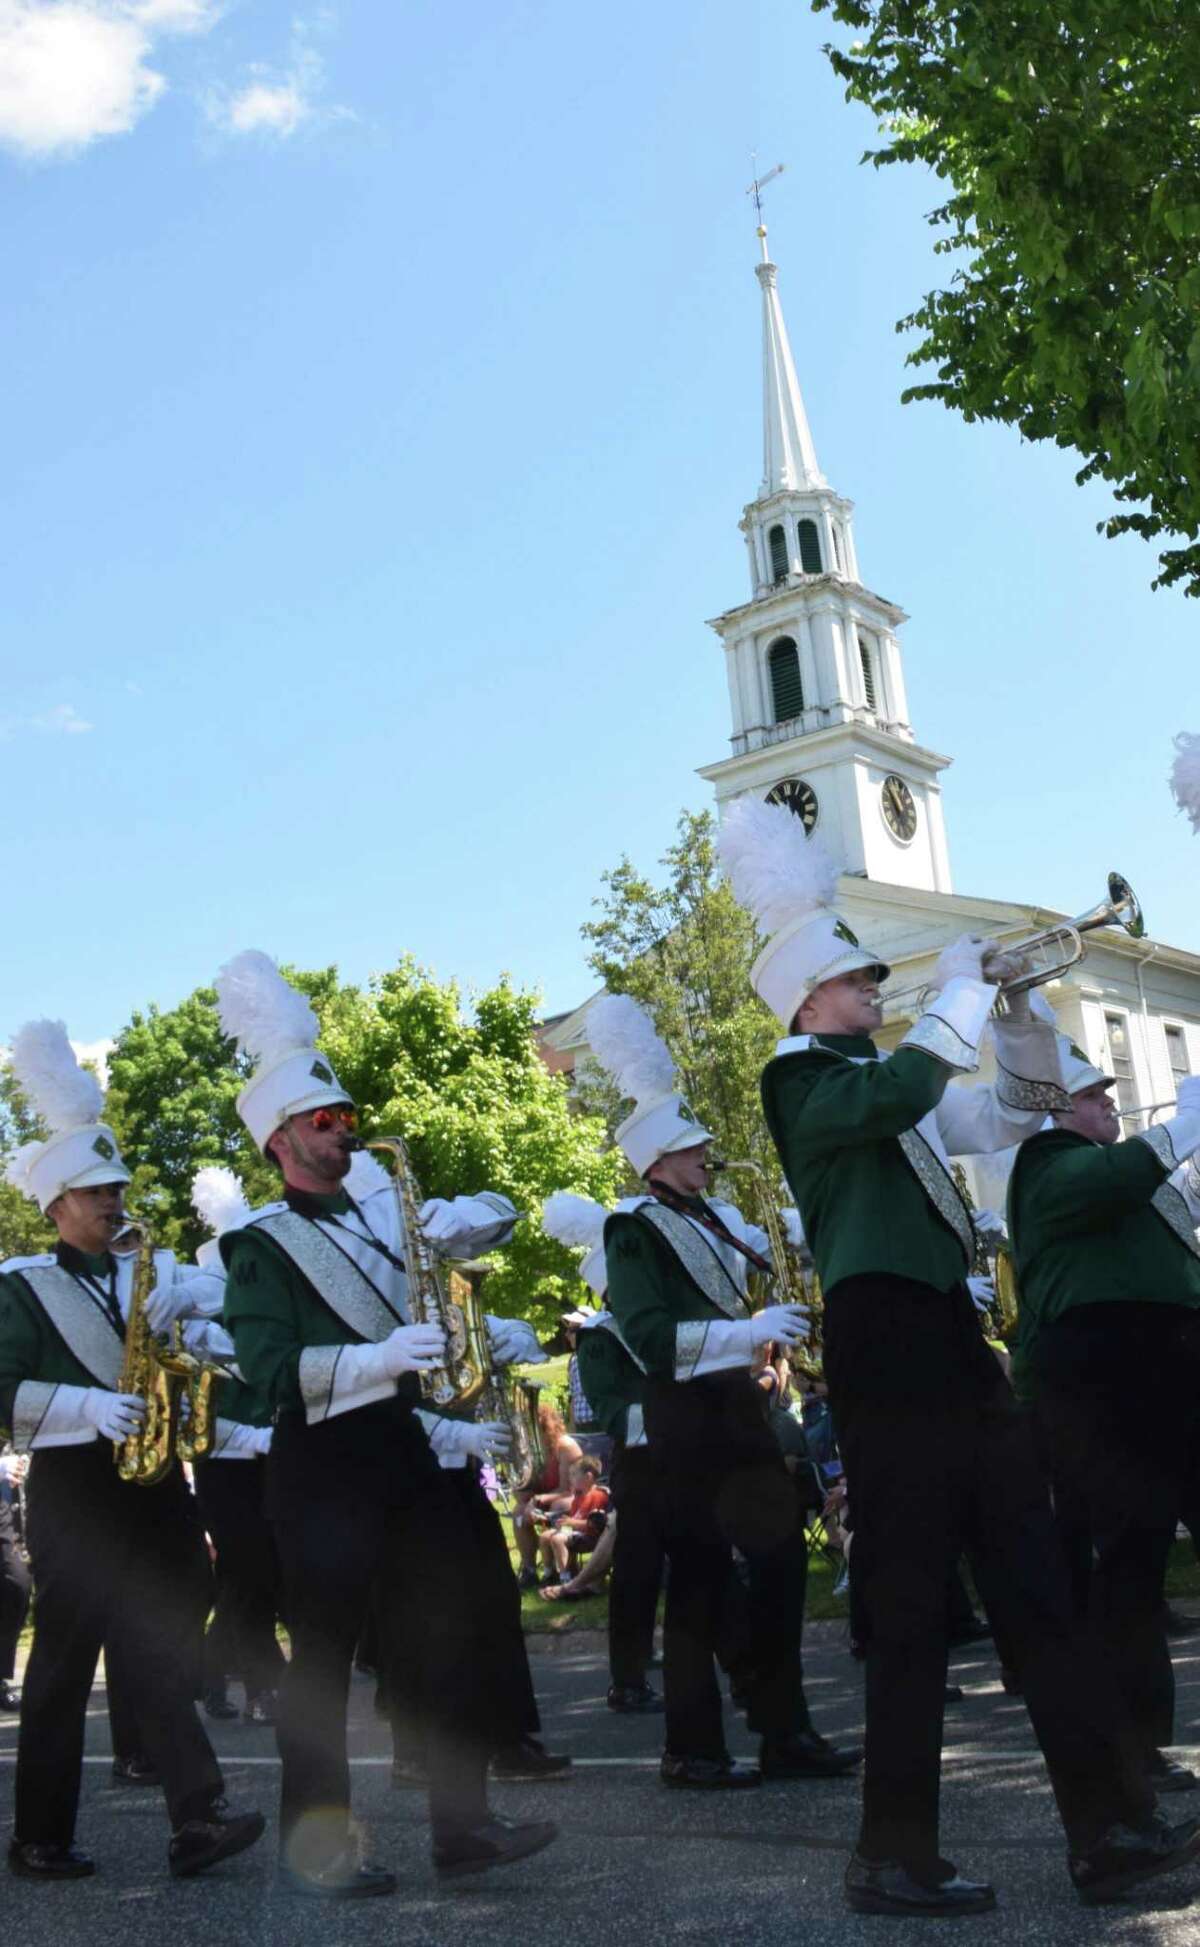 Spectrum/New Milford recognized Memorial Day with a ceremony in front of the New Milford Public Library, followed by a parade downtown. May 27, 2019. Above, members of the New Milford High School band march along Main Street, with the First Congregational Church in the background.